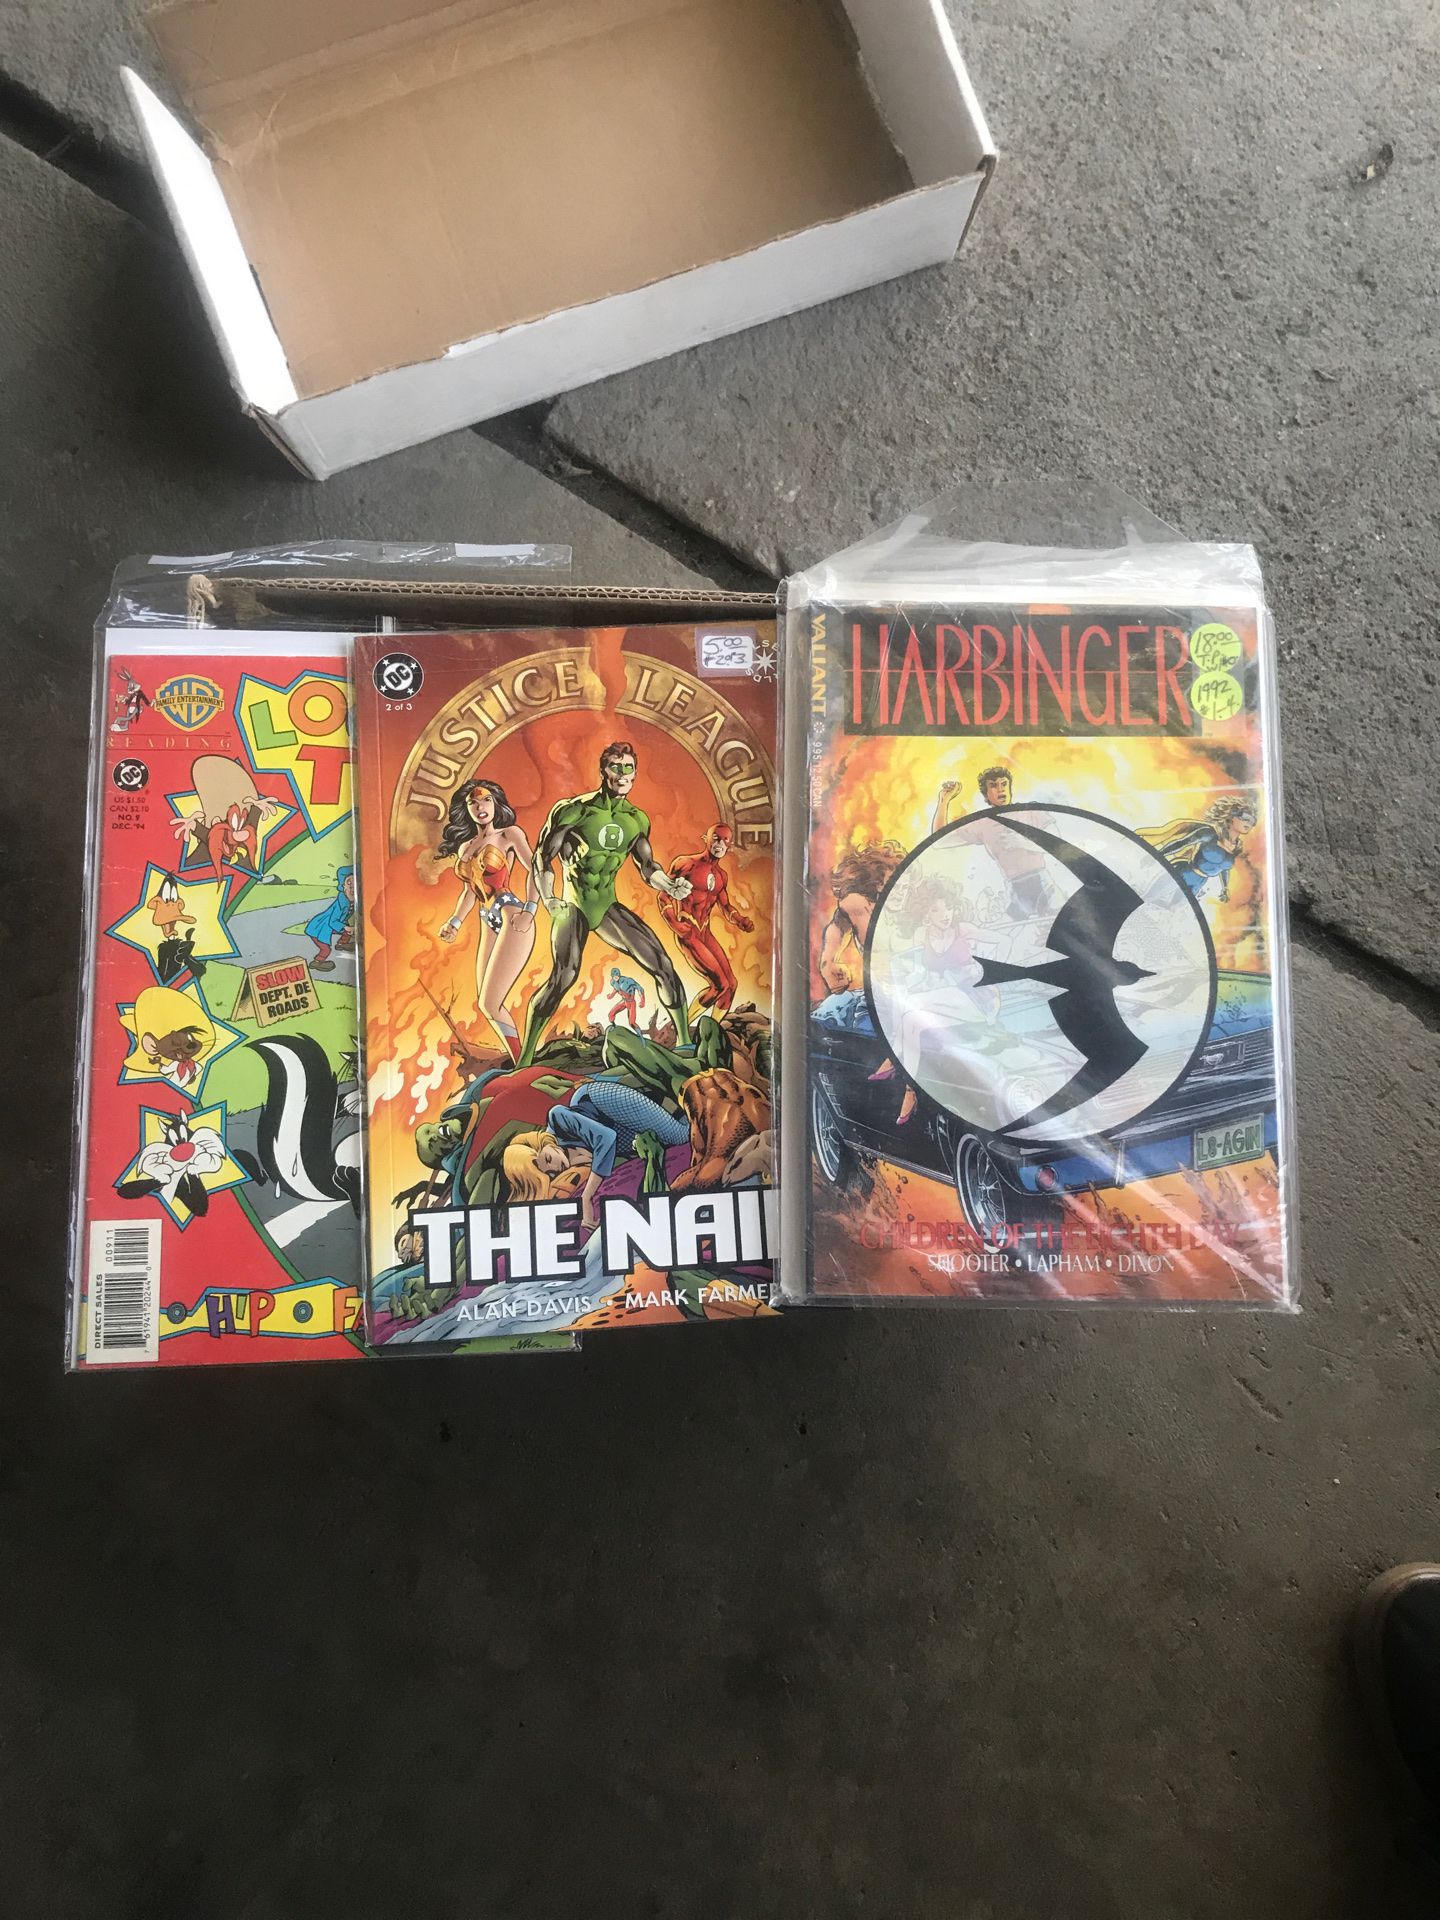 Magazines and comics of Marvel and DC